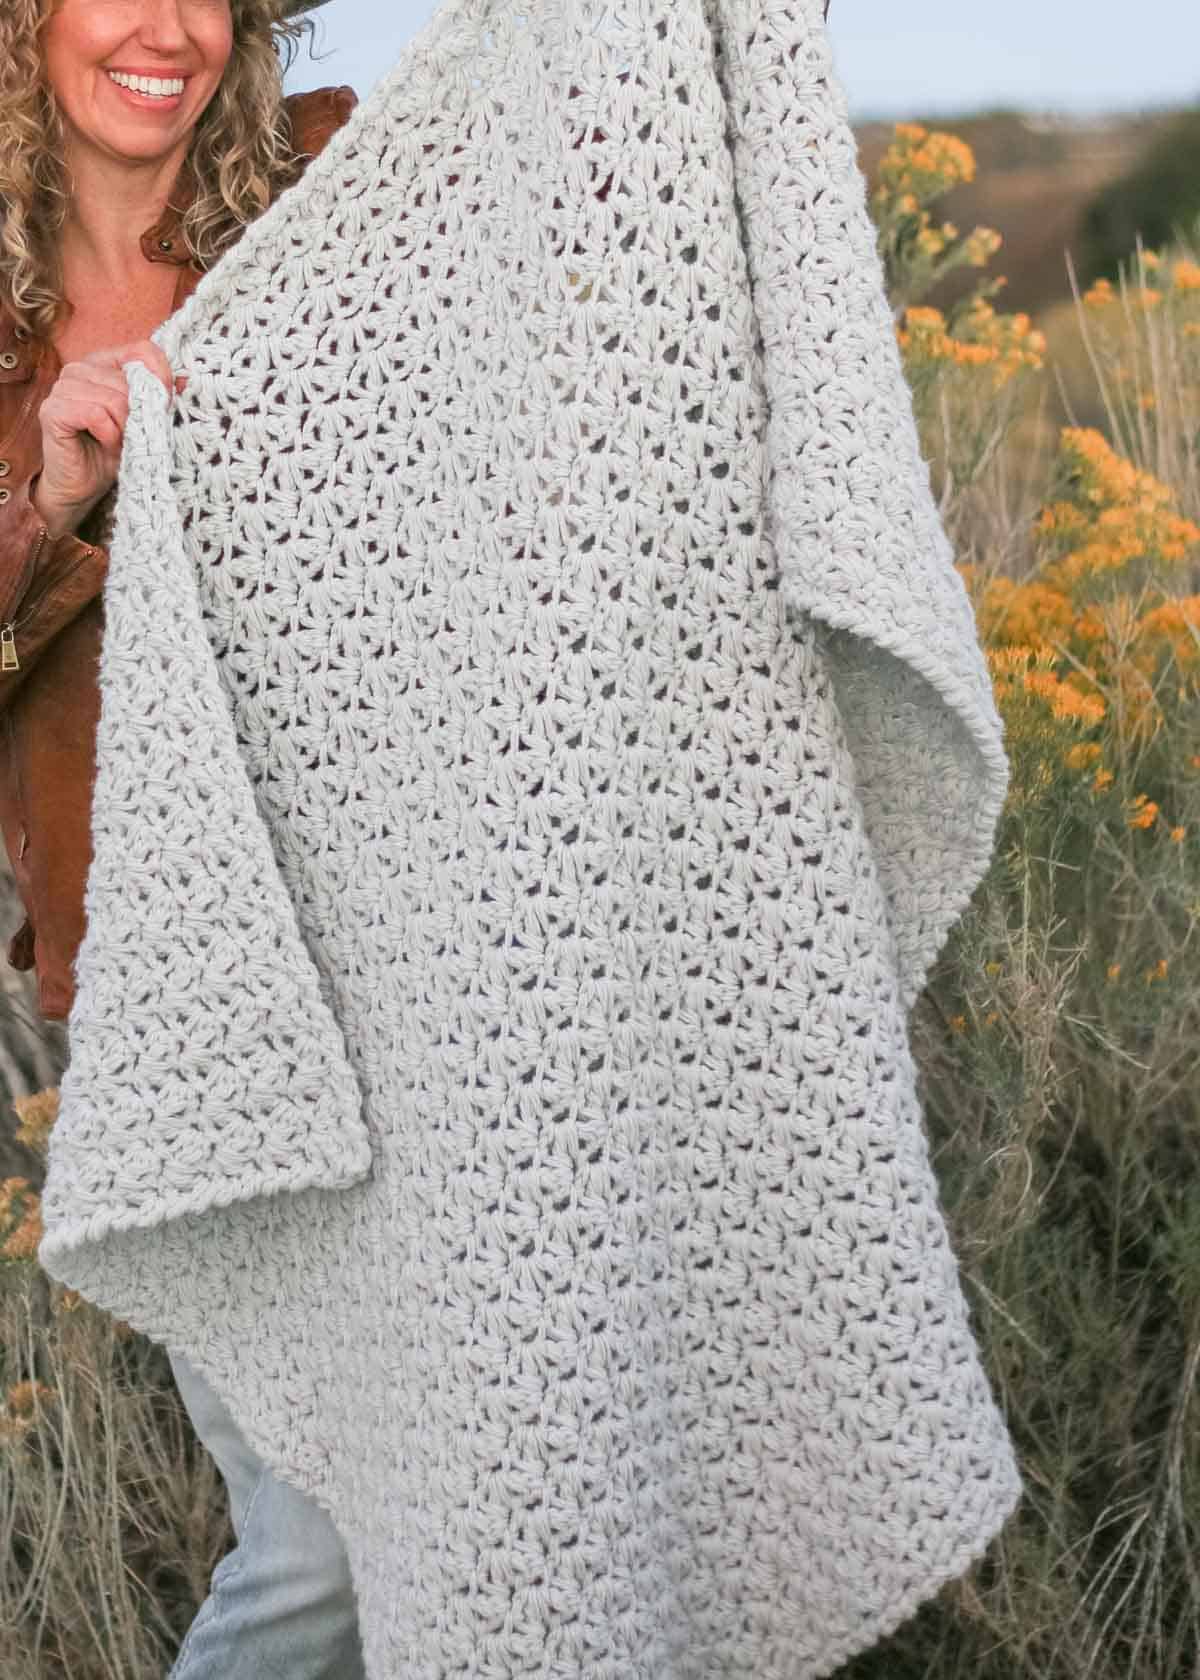 A woman smilling while holding a fast, crochet chunky blanket.